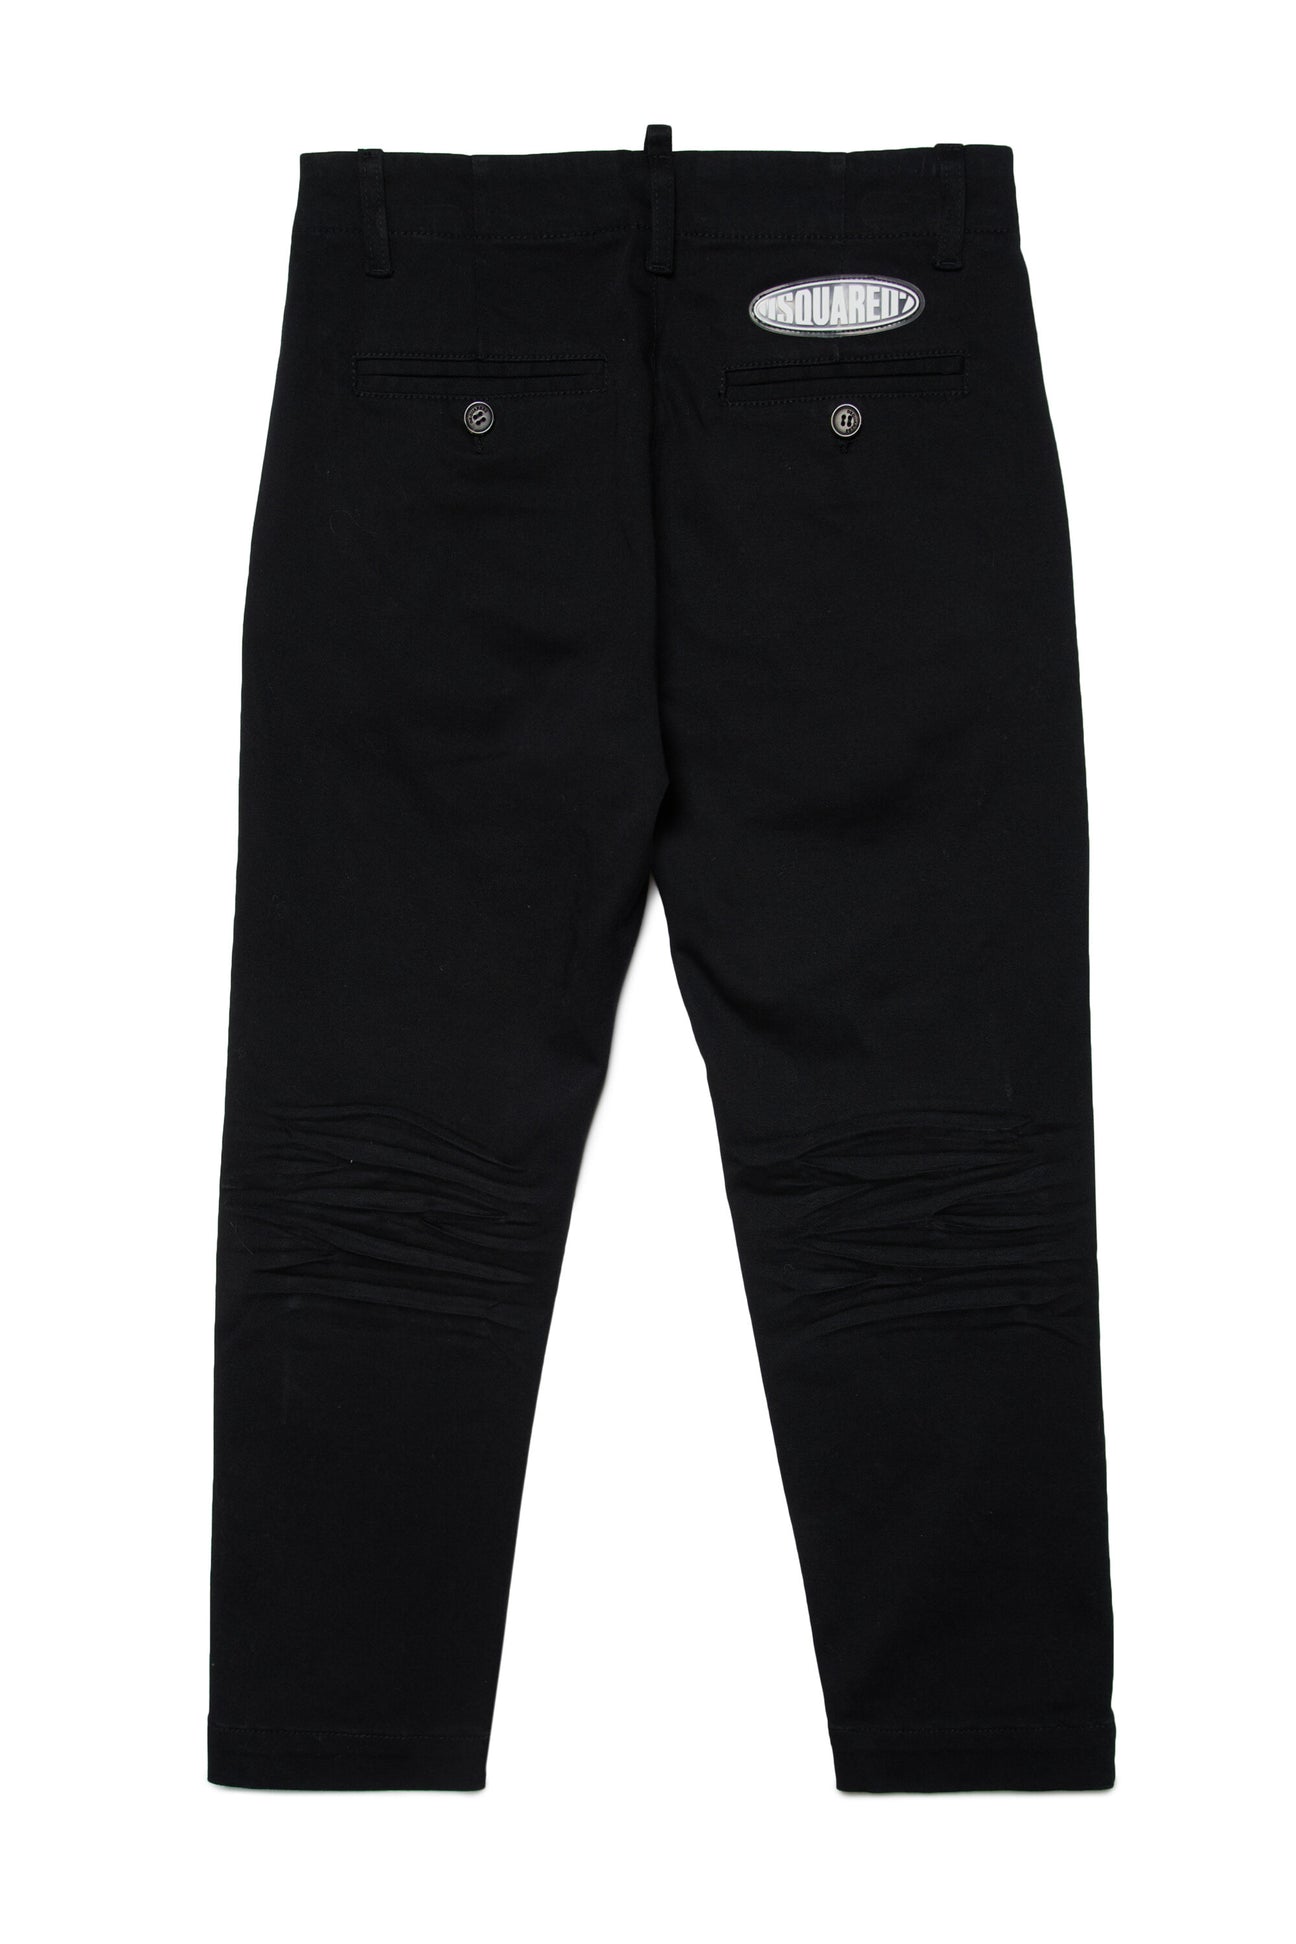 Gabardine chino pants branded with surf logo patch Gabardine chino pants branded with surf logo patch